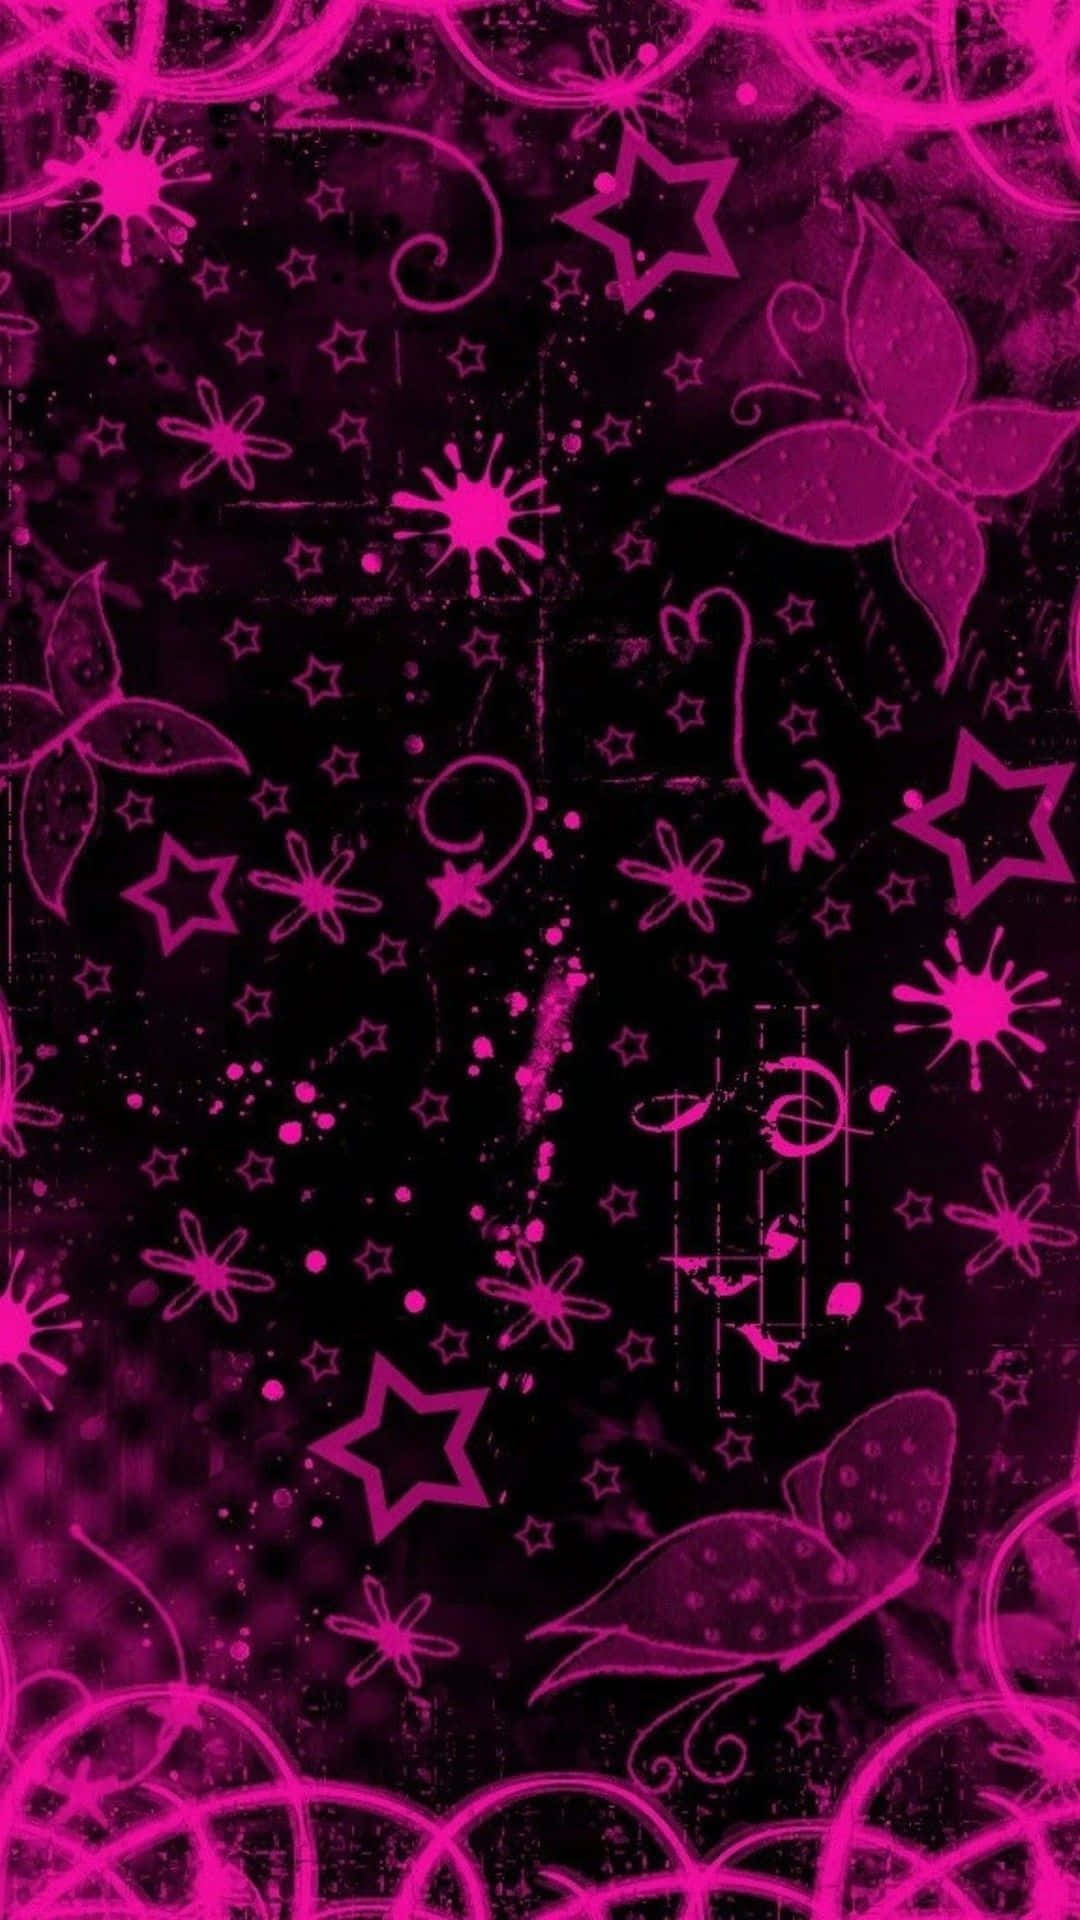 Pink Wallpaper With Stars And Butterflies Wallpaper